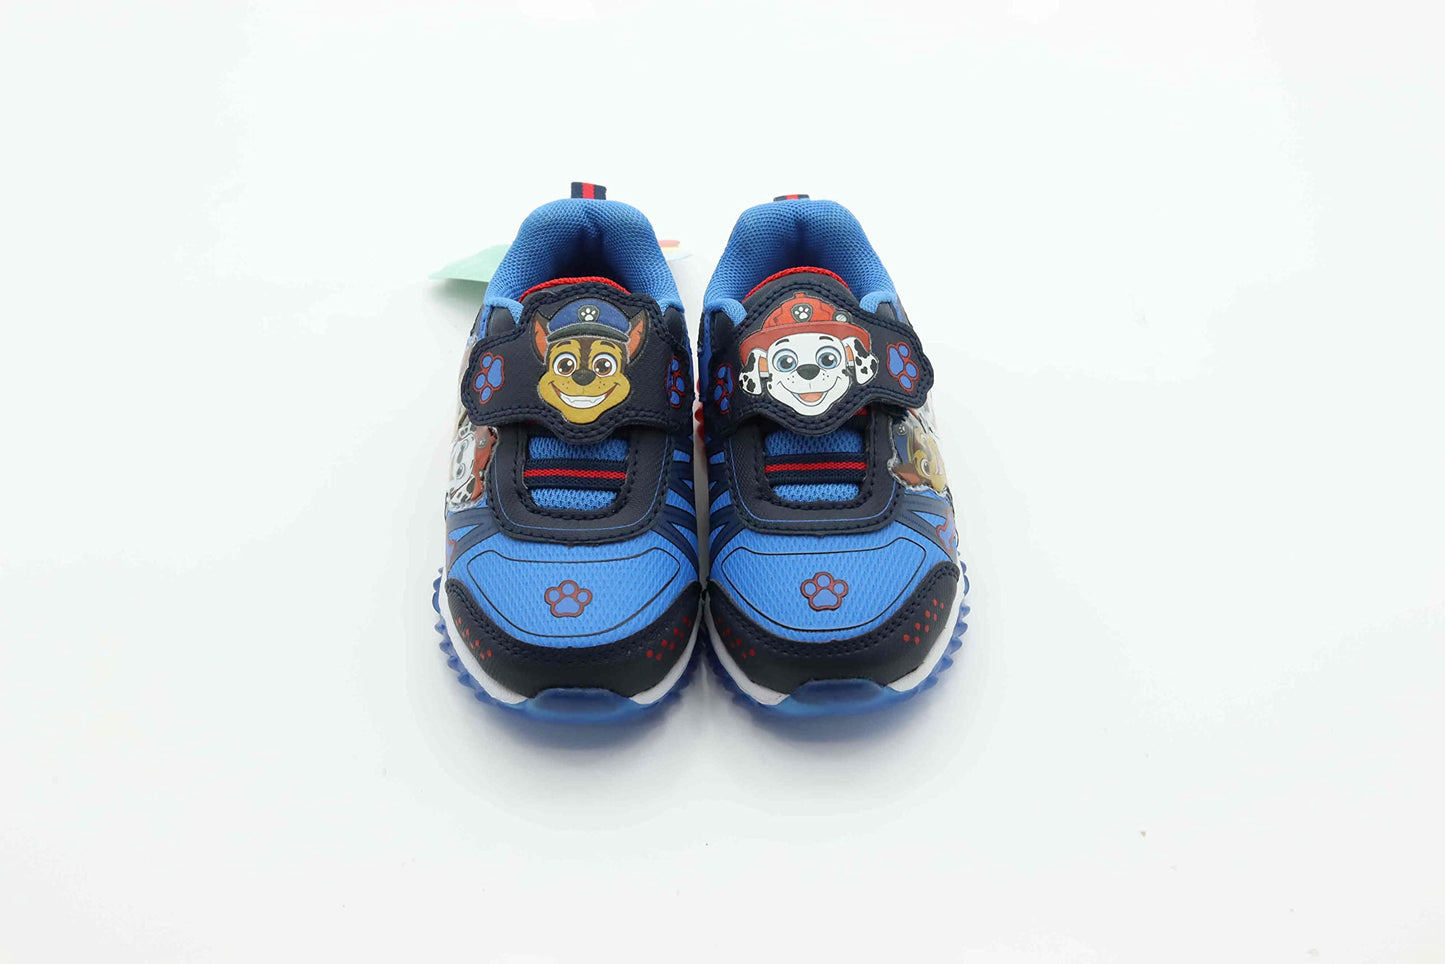 Nickelodeon Paw Patrol Boy's Lighted Athletic Sneaker, Blue/Red (Toddler/Little Kid)